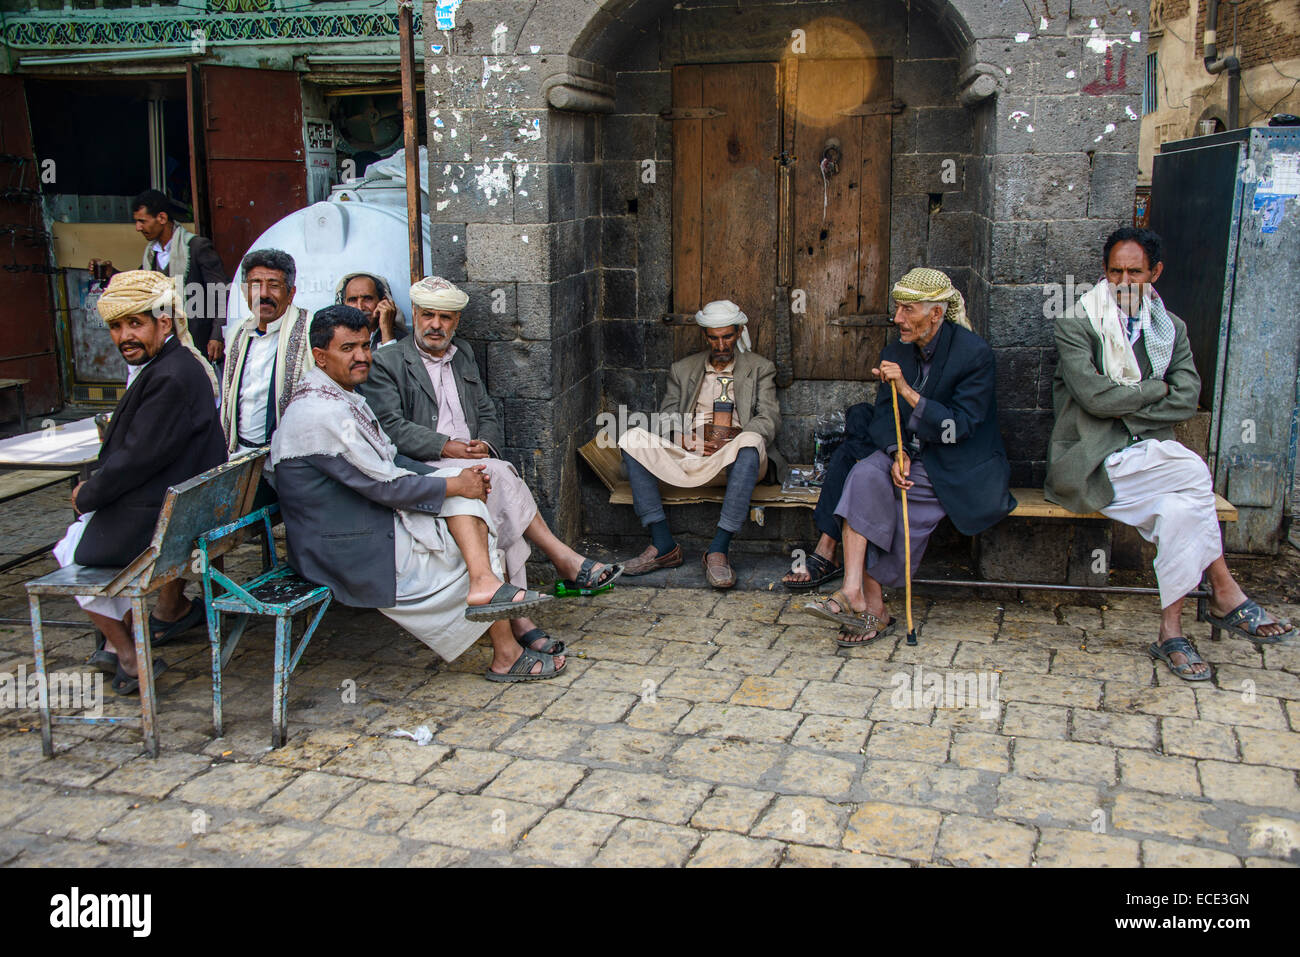 Men sitting in front of a house in the old city, Sana'a, Yemen Stock Photo